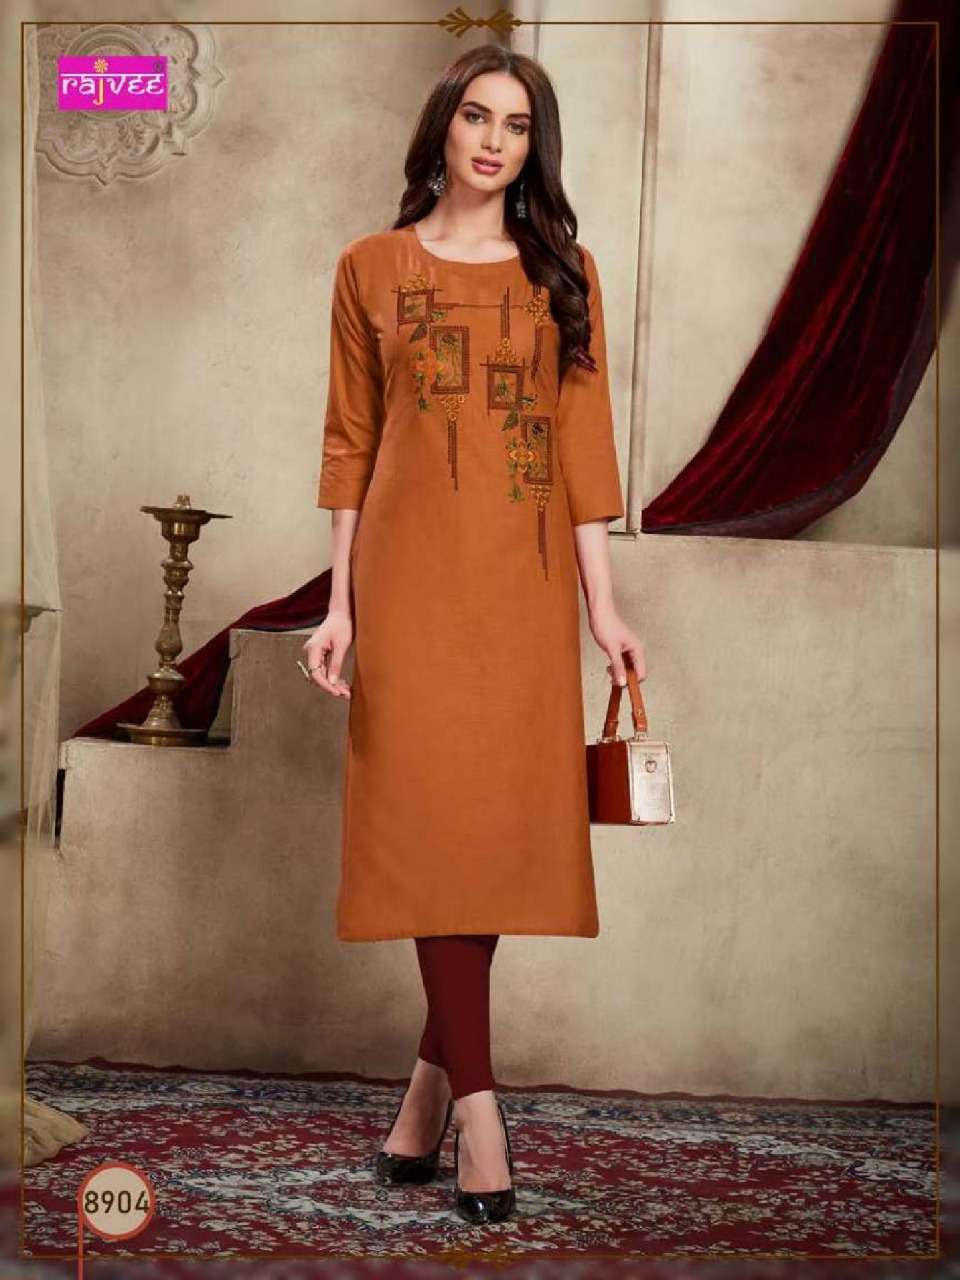 BARFI BY RAJVEE 8901 TO 8908 SERIES DESIGNER BEAUTIFUL COLORFUL STYLISH FANCY CASUAL WEAR & ETHNIC WEAR & READY TO WEAR COTTON PRINTED KURTIS AT WHOLESALE PRICE